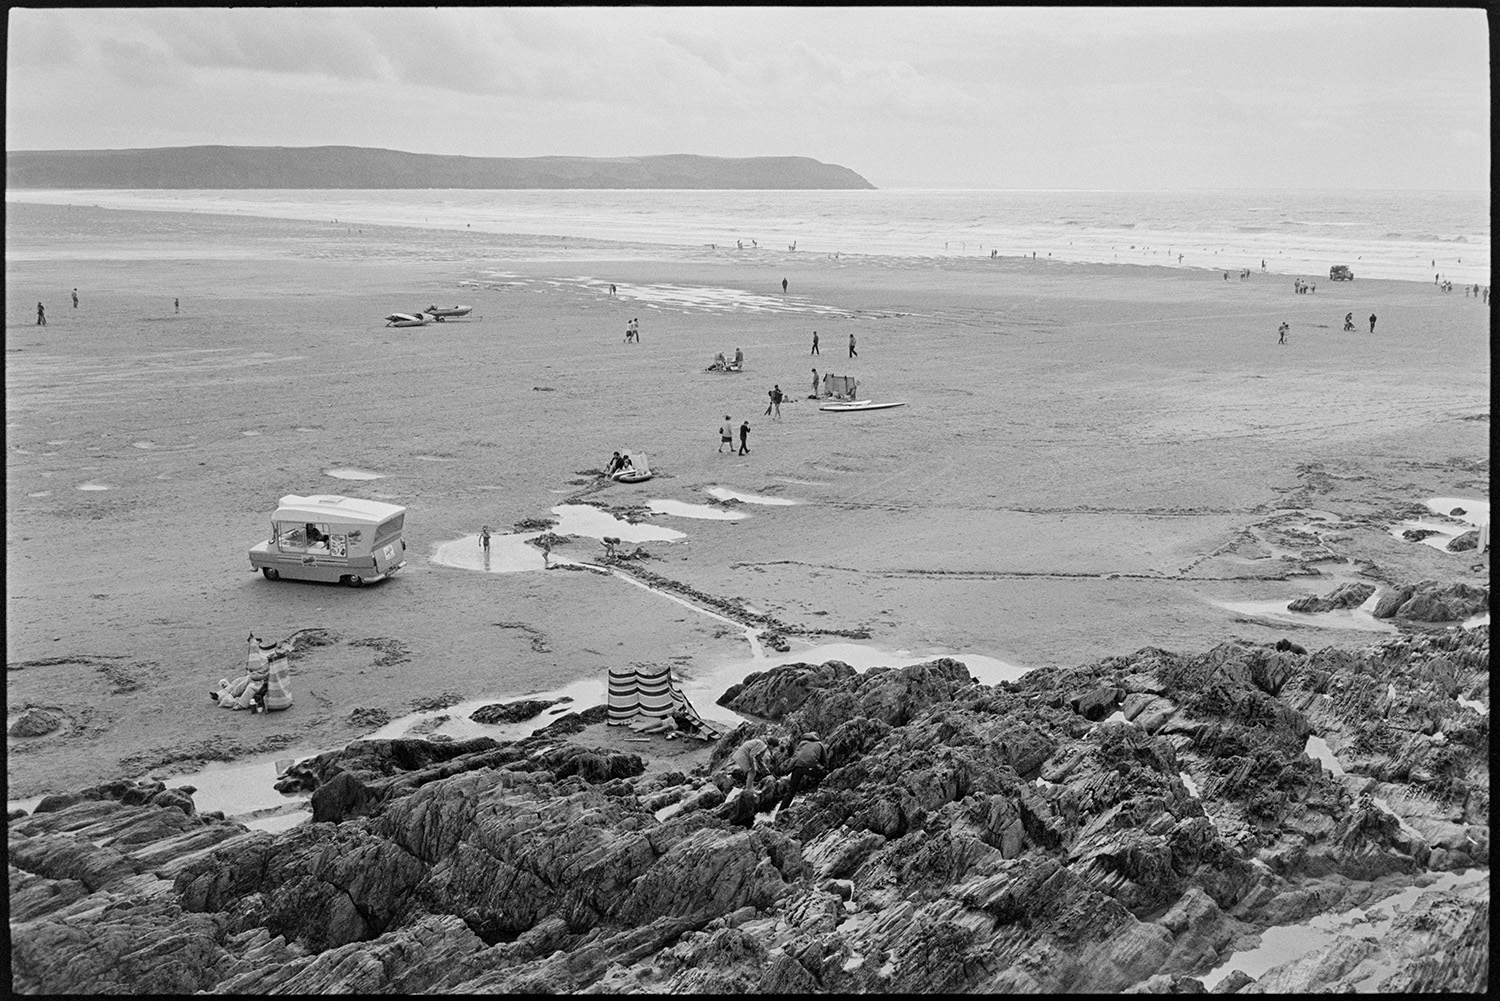 Beach scenes with people sheltering and having tea, children playing in rock pools.
[Holidaymakers and an ice cream van on Woolacombe beach. Some people are sat behind windbreaks by rocks in the foreground. Other people are in the sea in the background.]